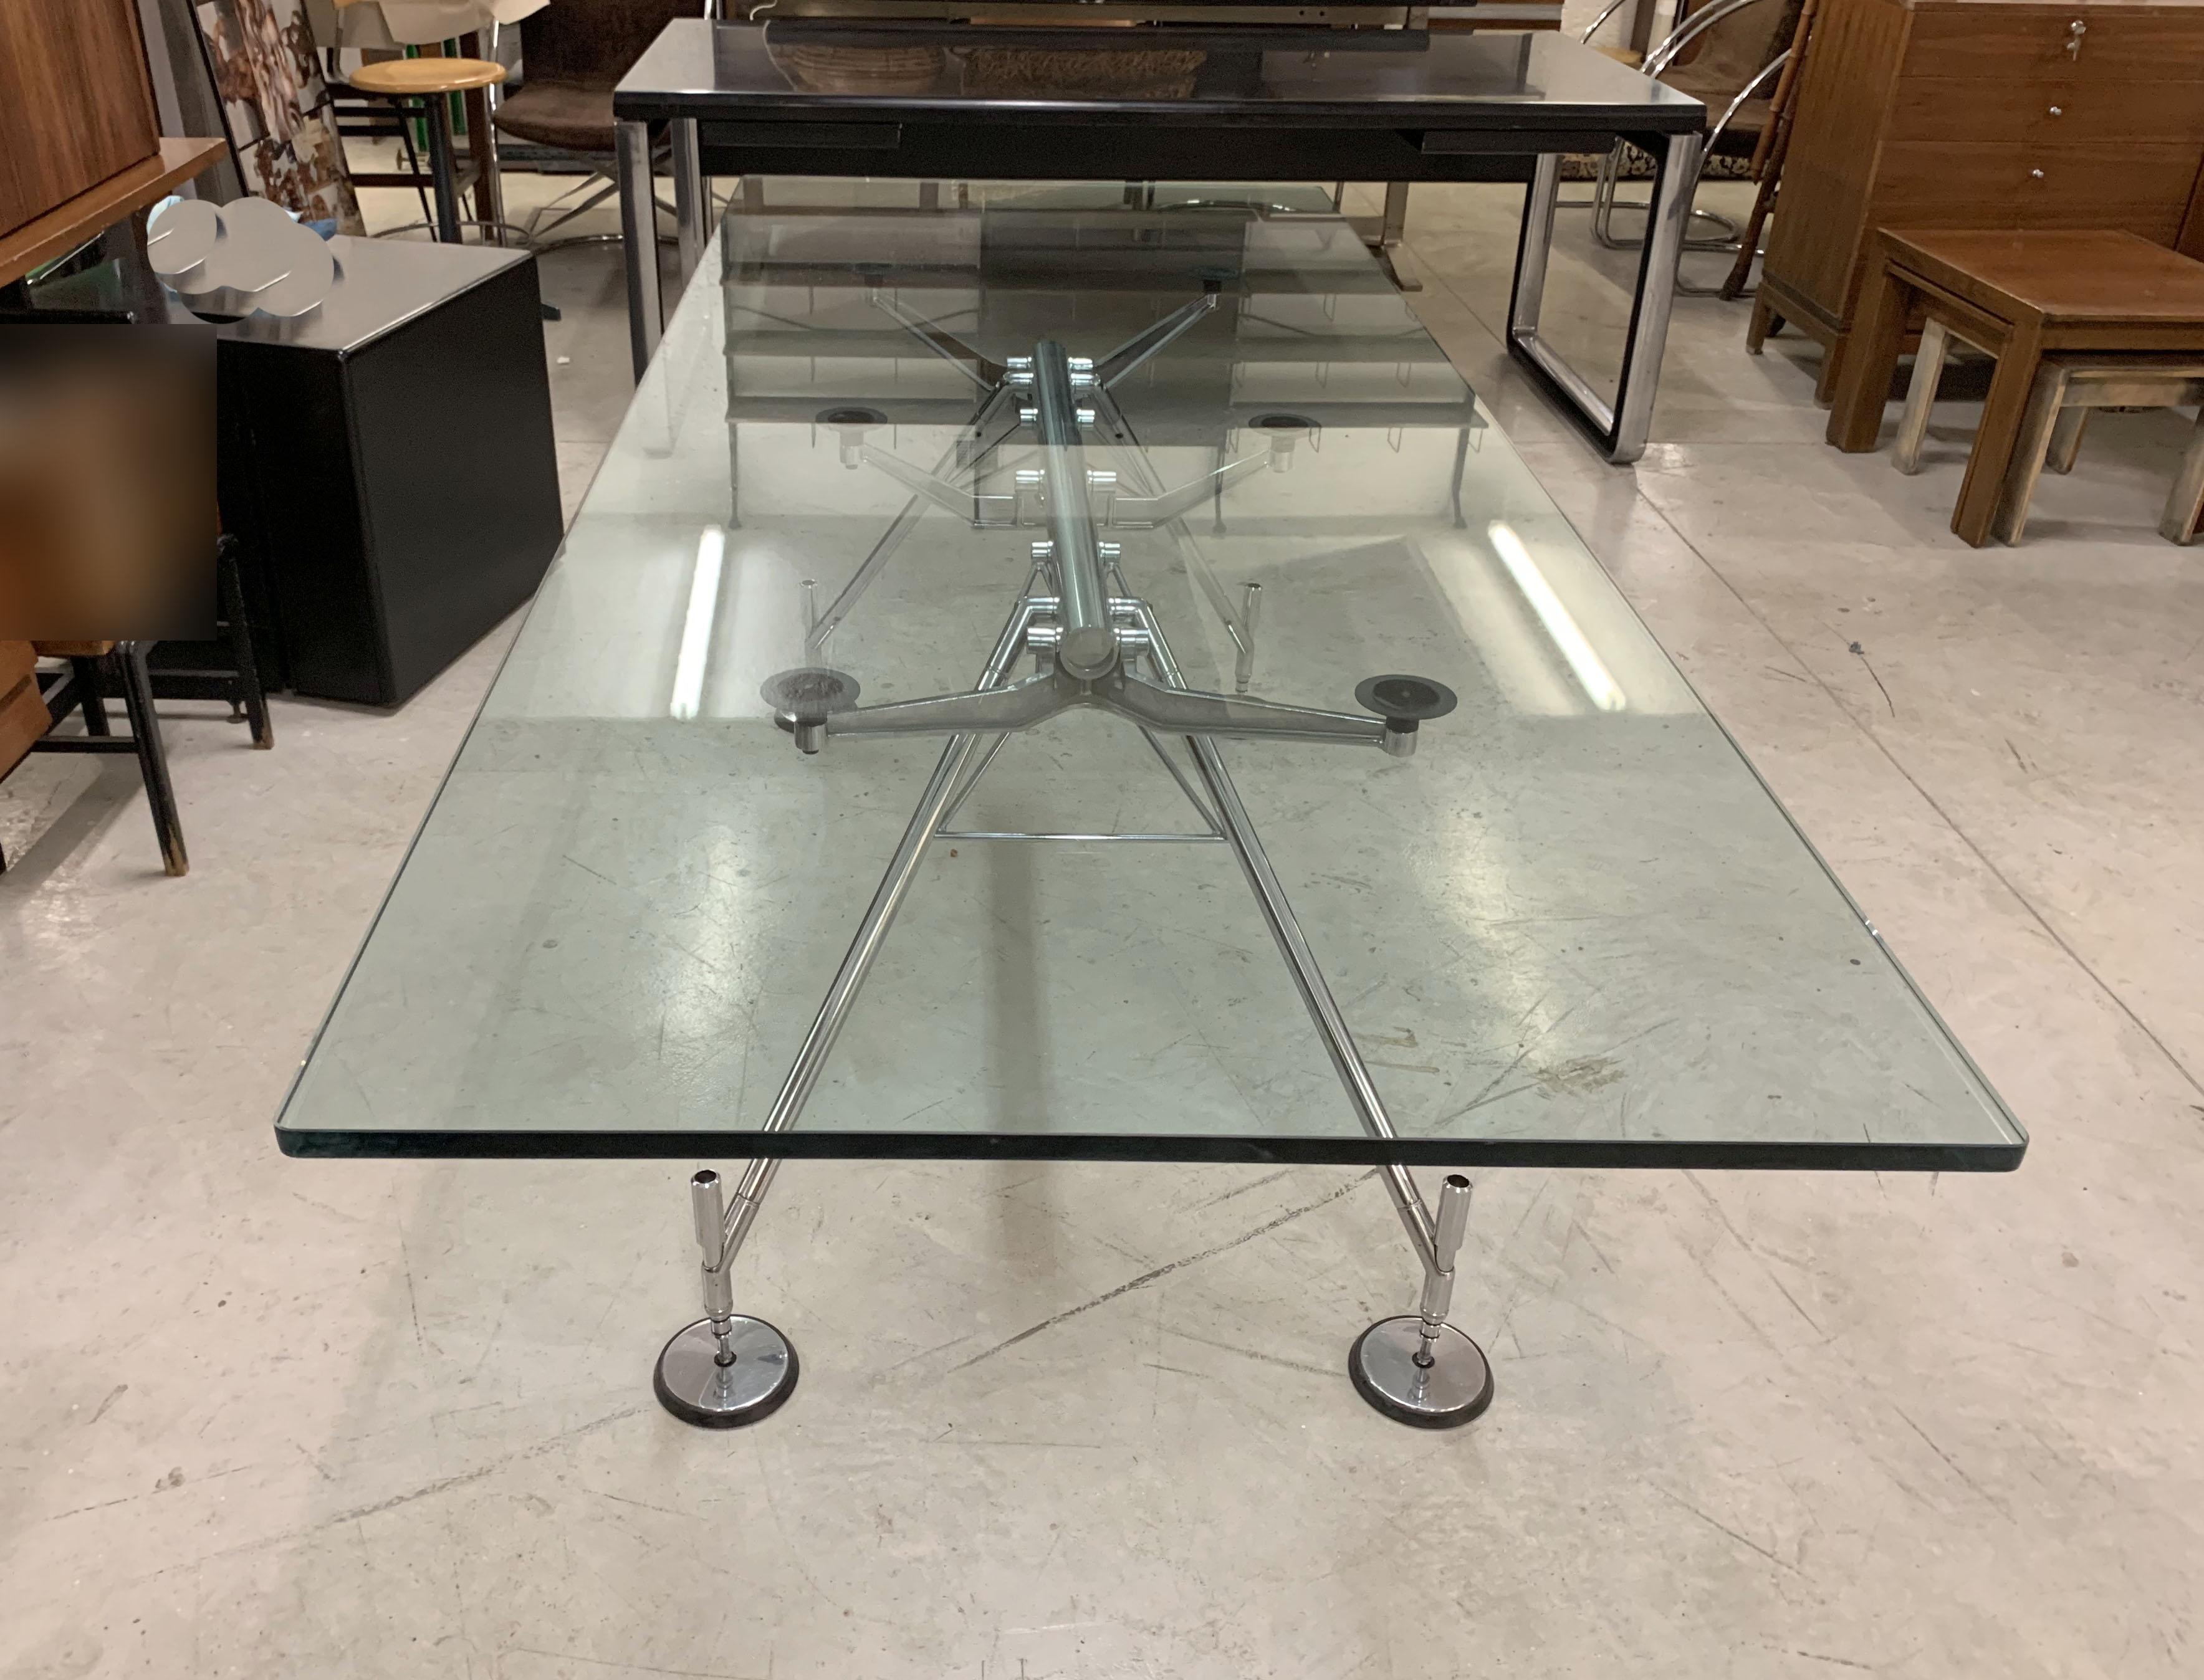 Late 19th Century Norman Foster Chromed Metal and Glass Nomos Dining Table for Tecno, Italy, 1986